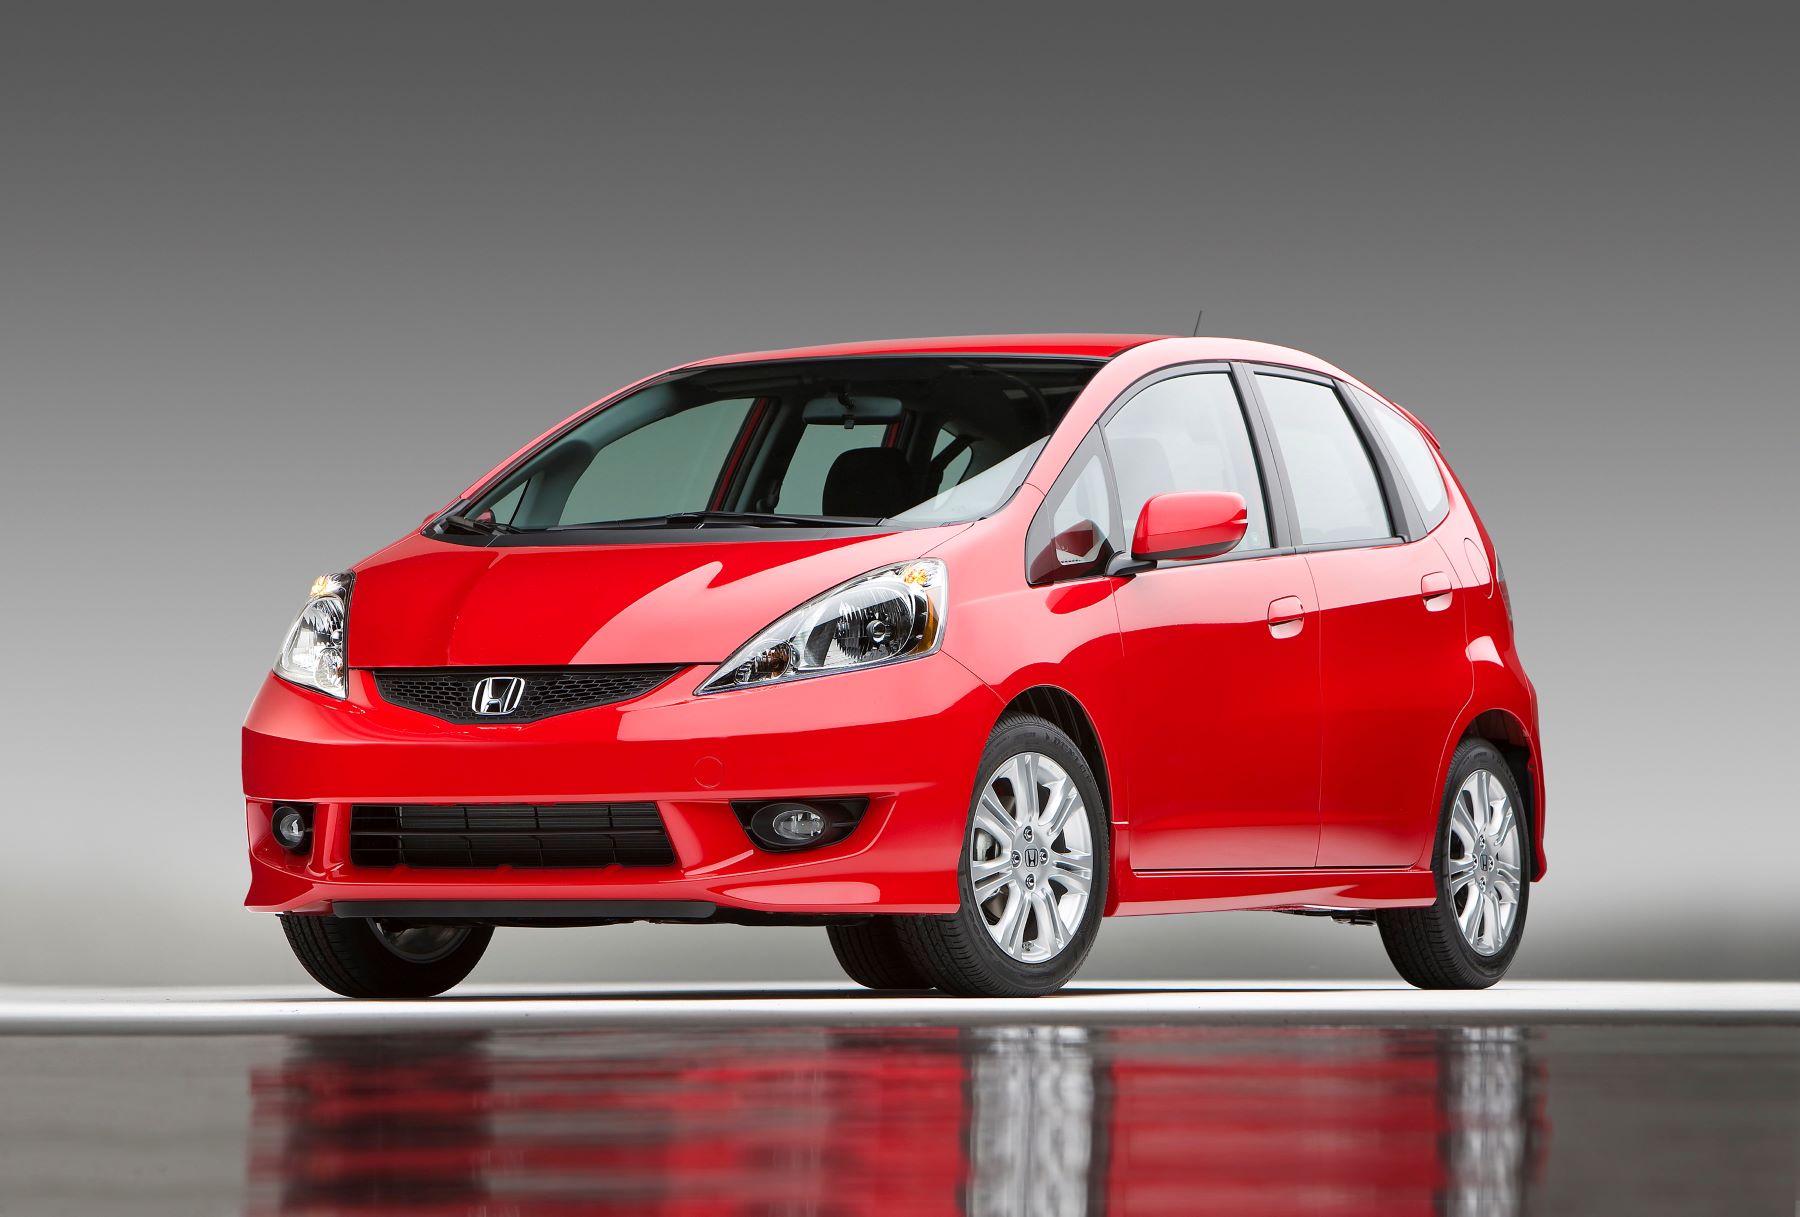 2011 Honda Fit Sport subcompact hatchback model in red